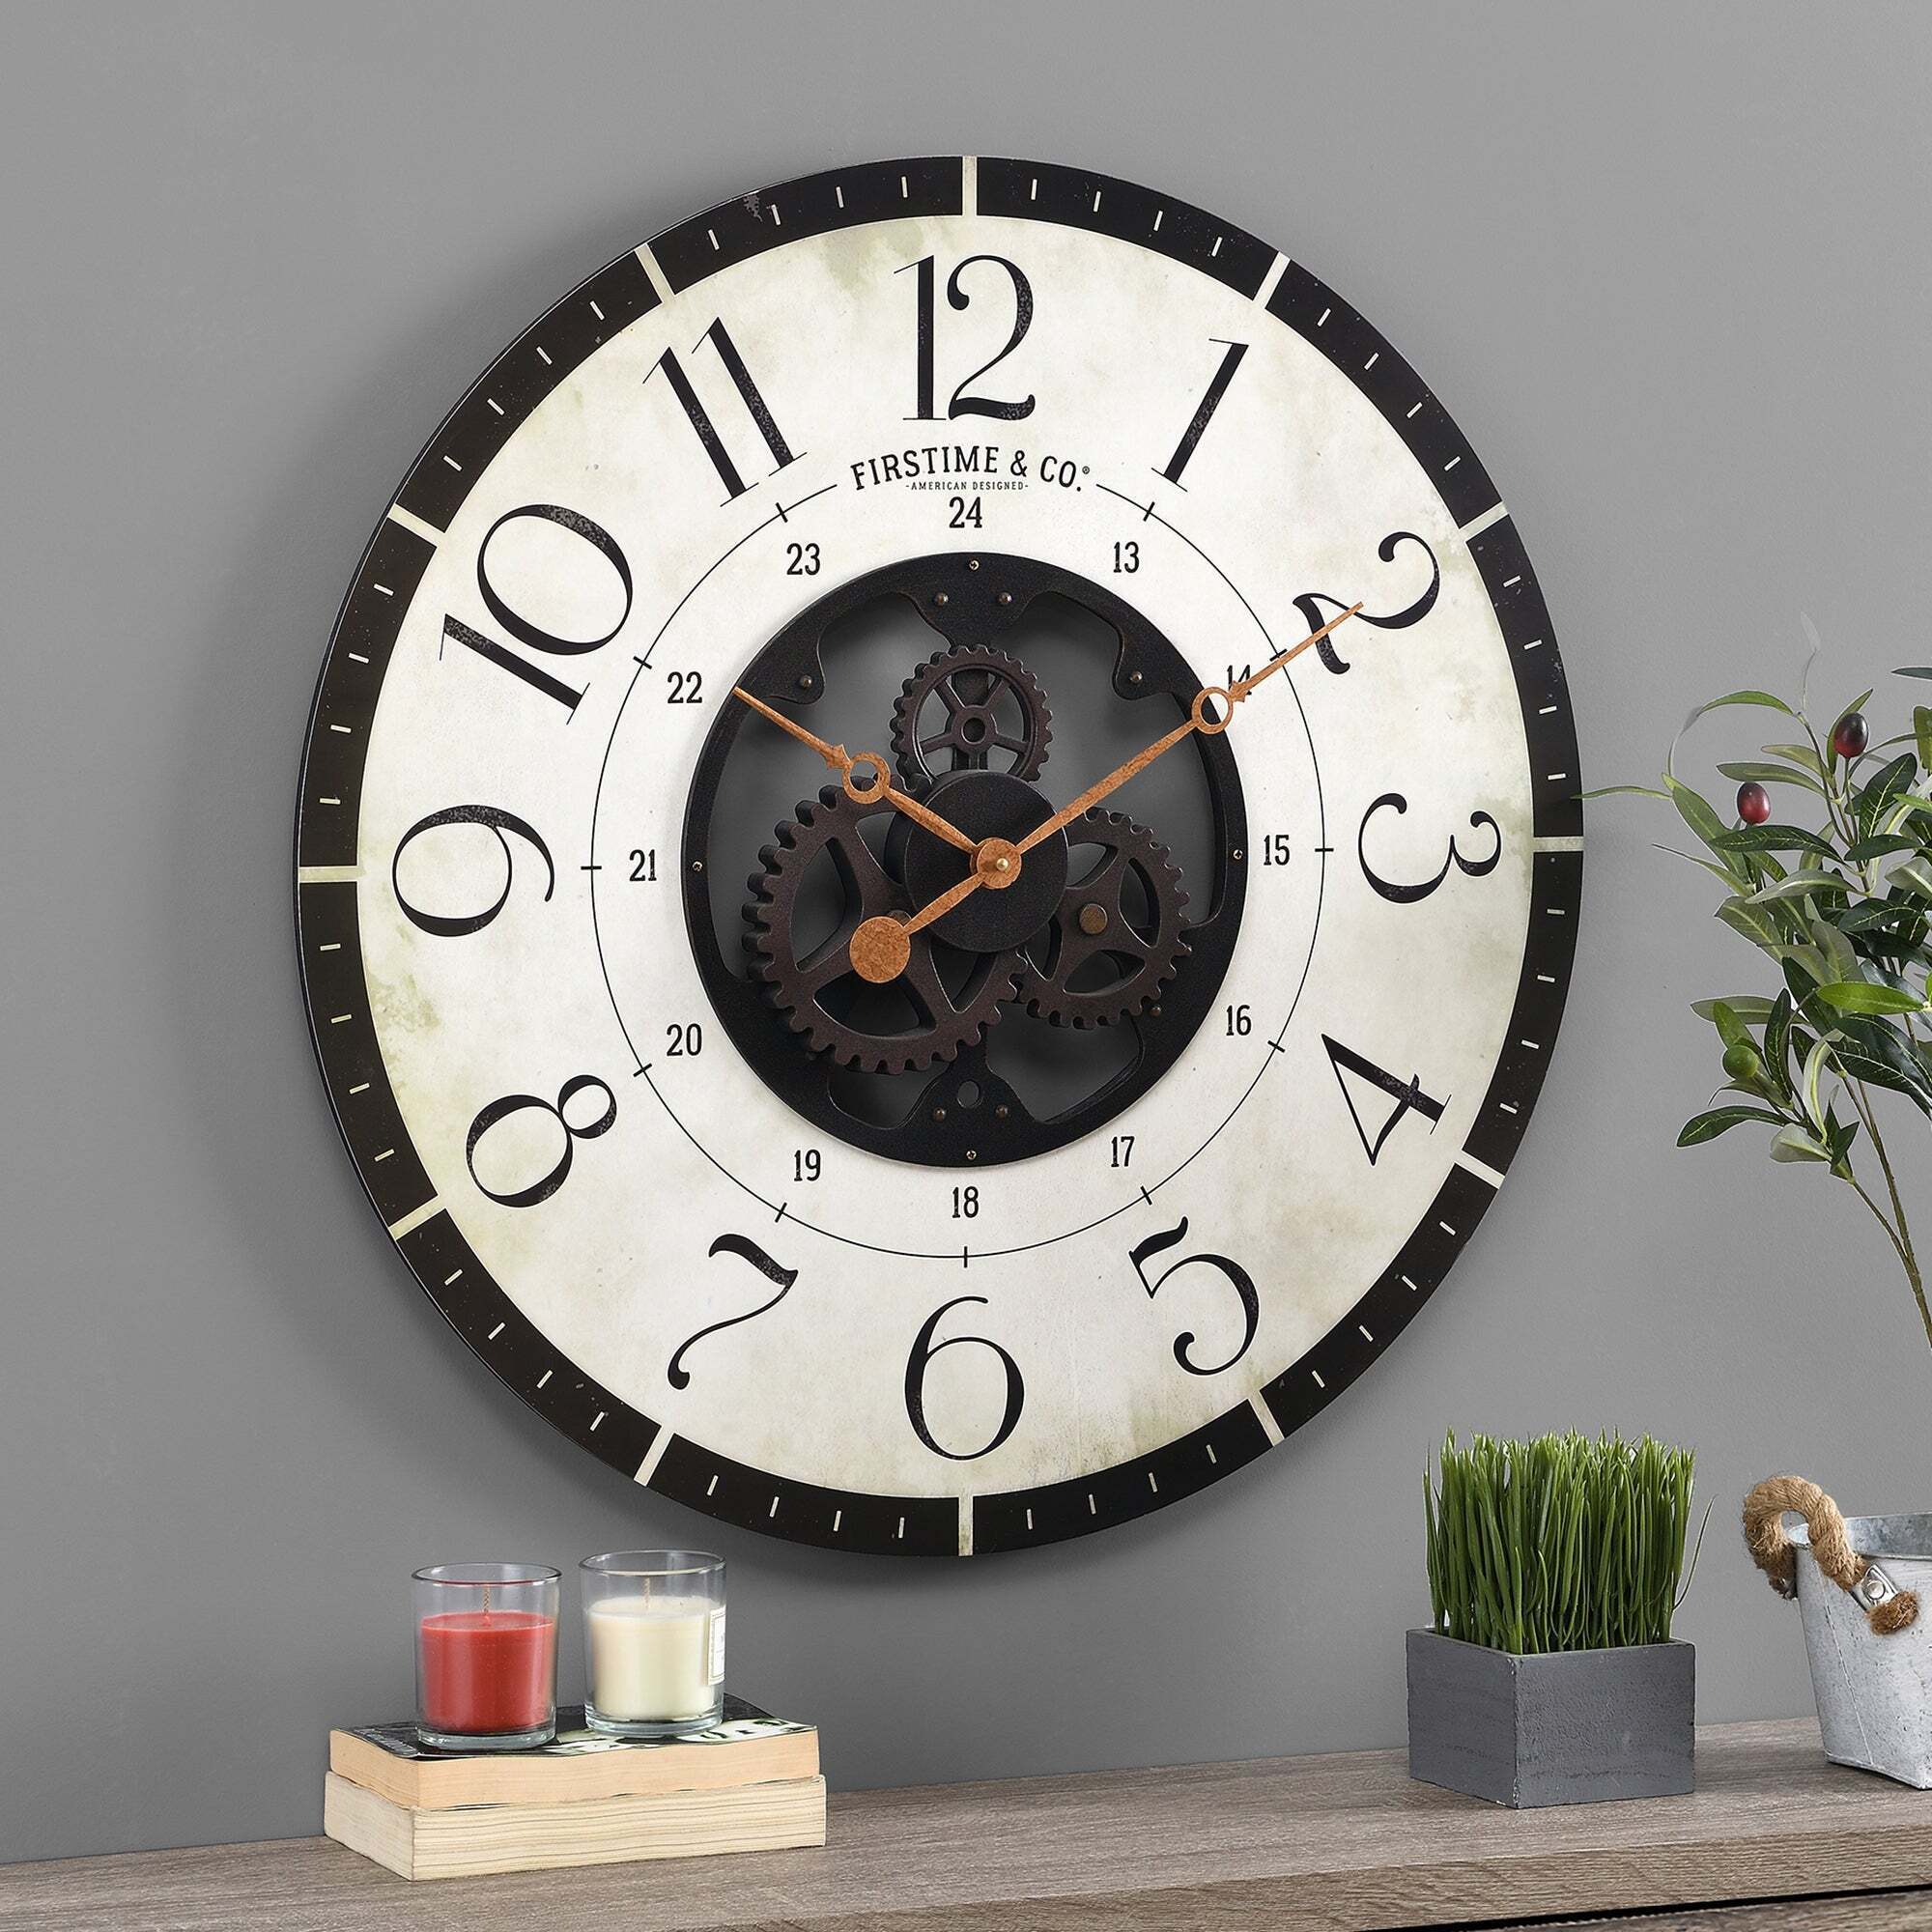 Huge clock that reminds us of a classic watch